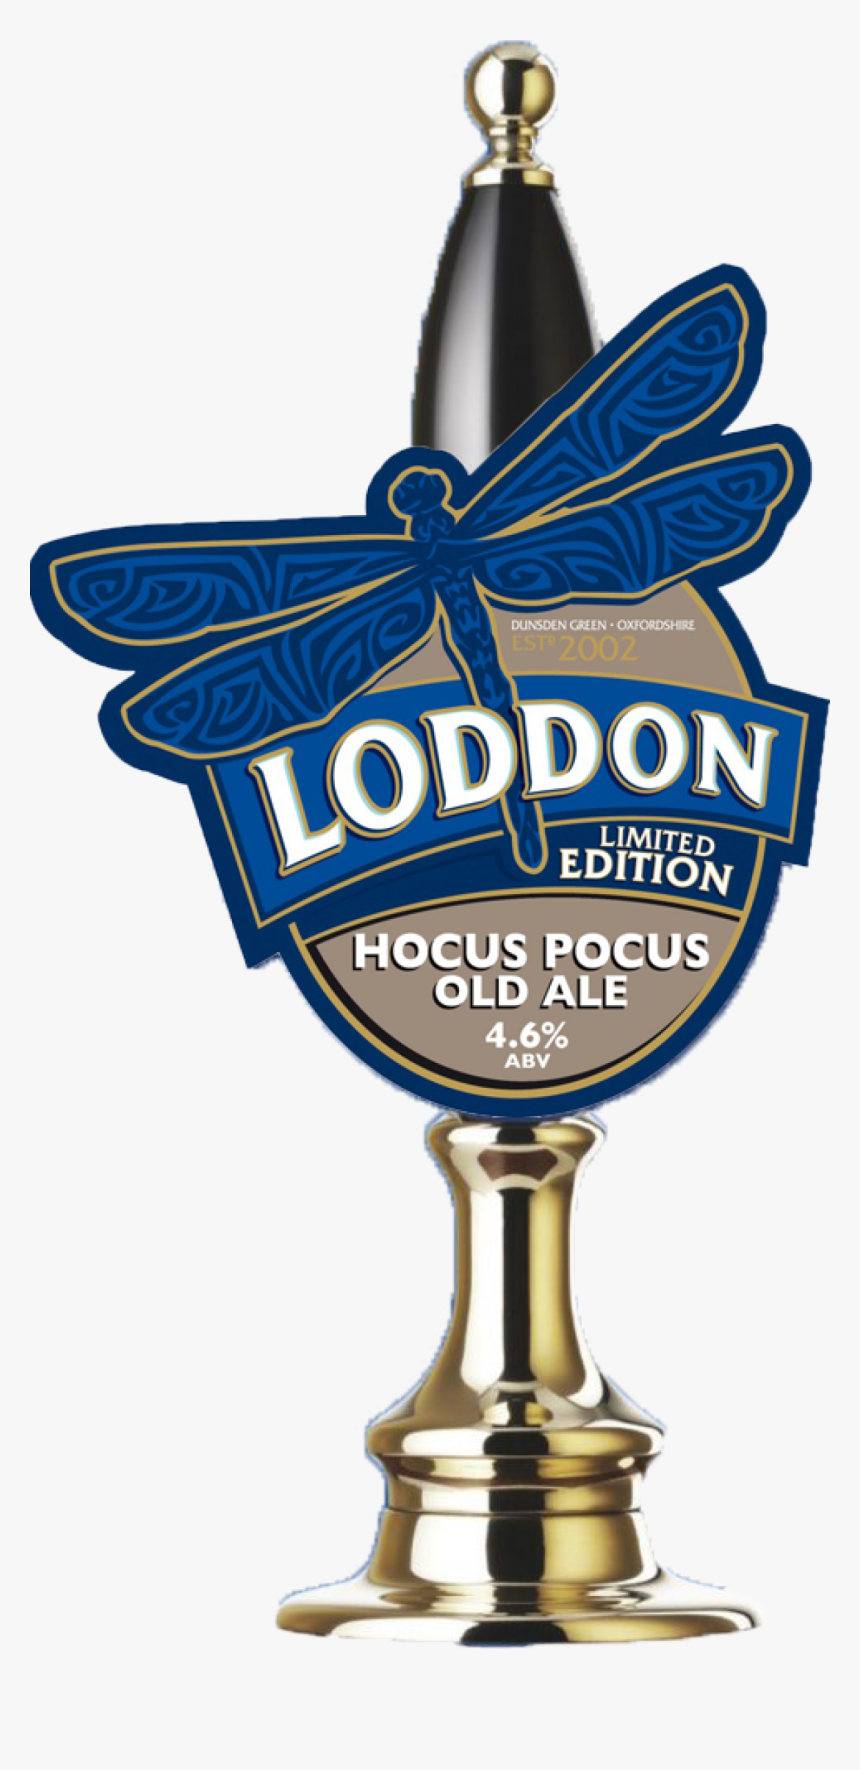 Northern Lights Orkney Brewery , Png Download - Loddon Brewery, Transparent Png, Free Download